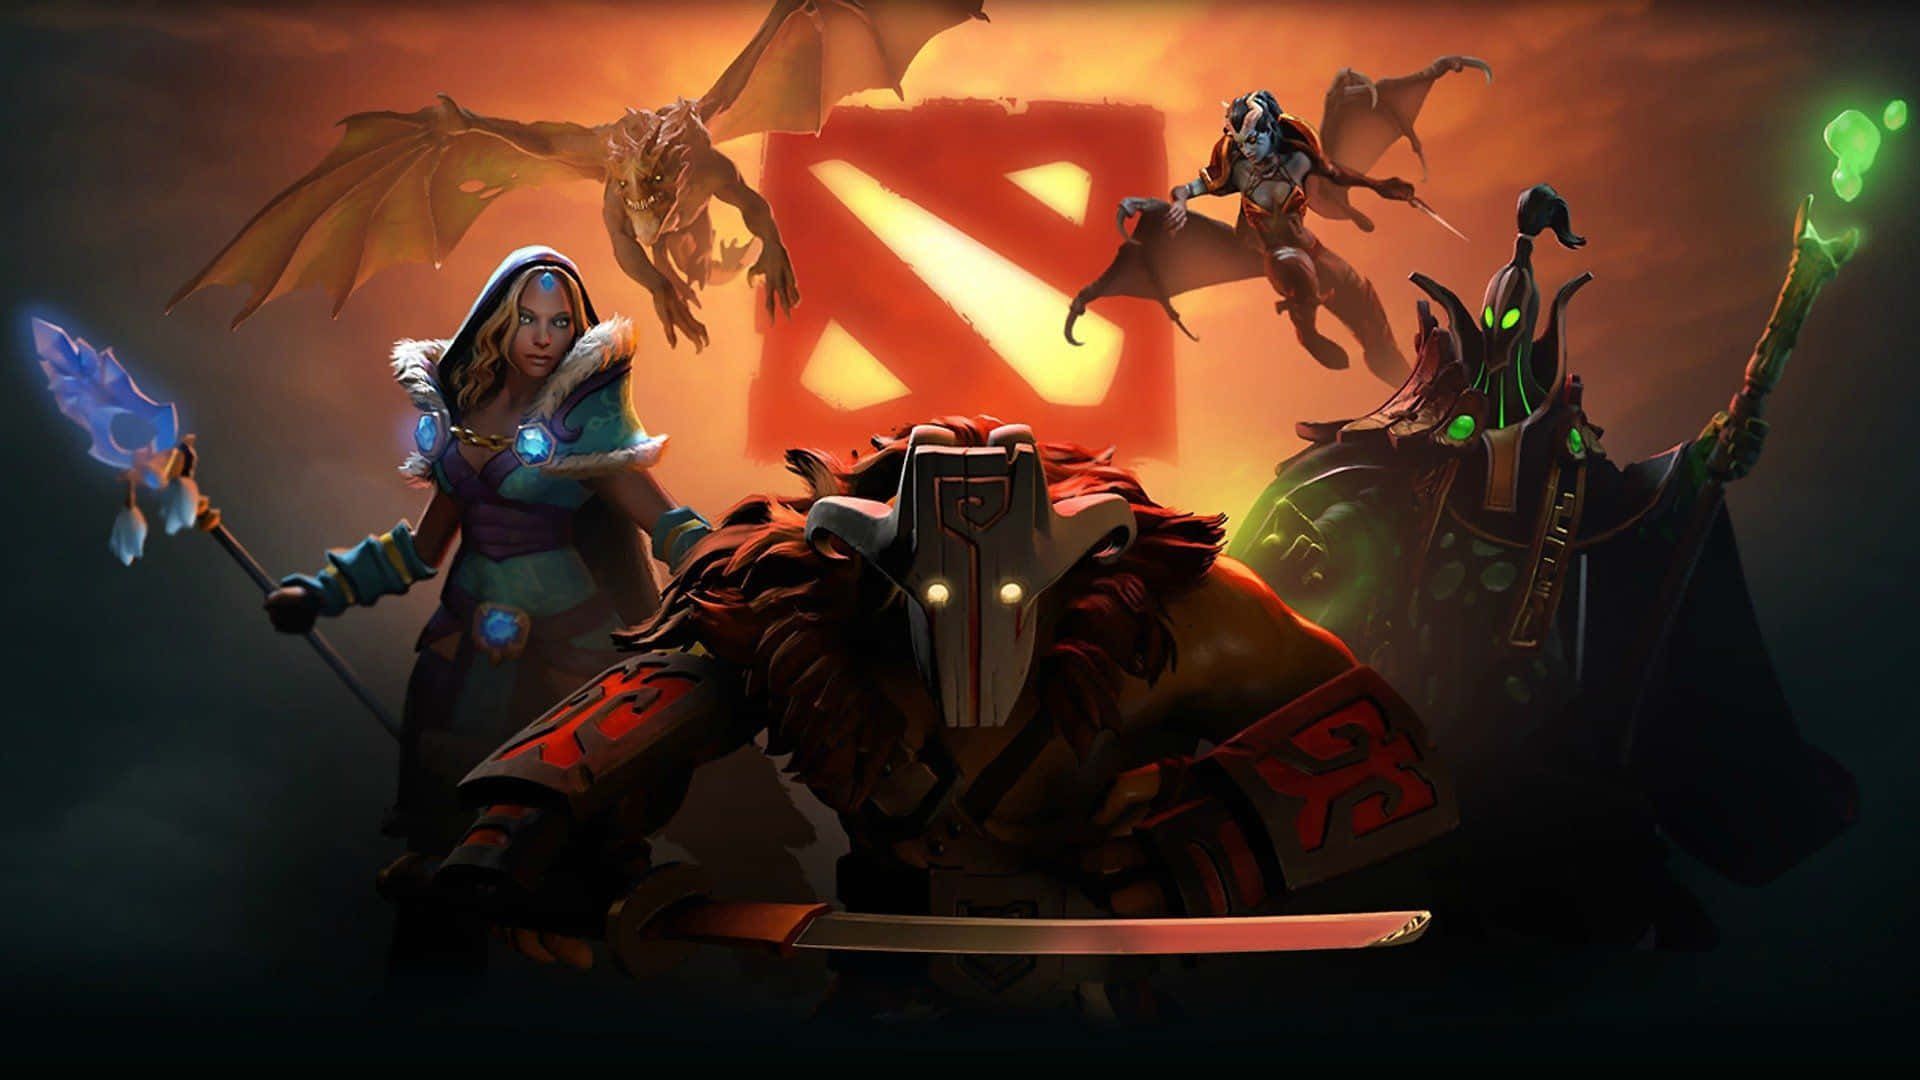 Dota 2 - A Group Of Characters With A Dragon